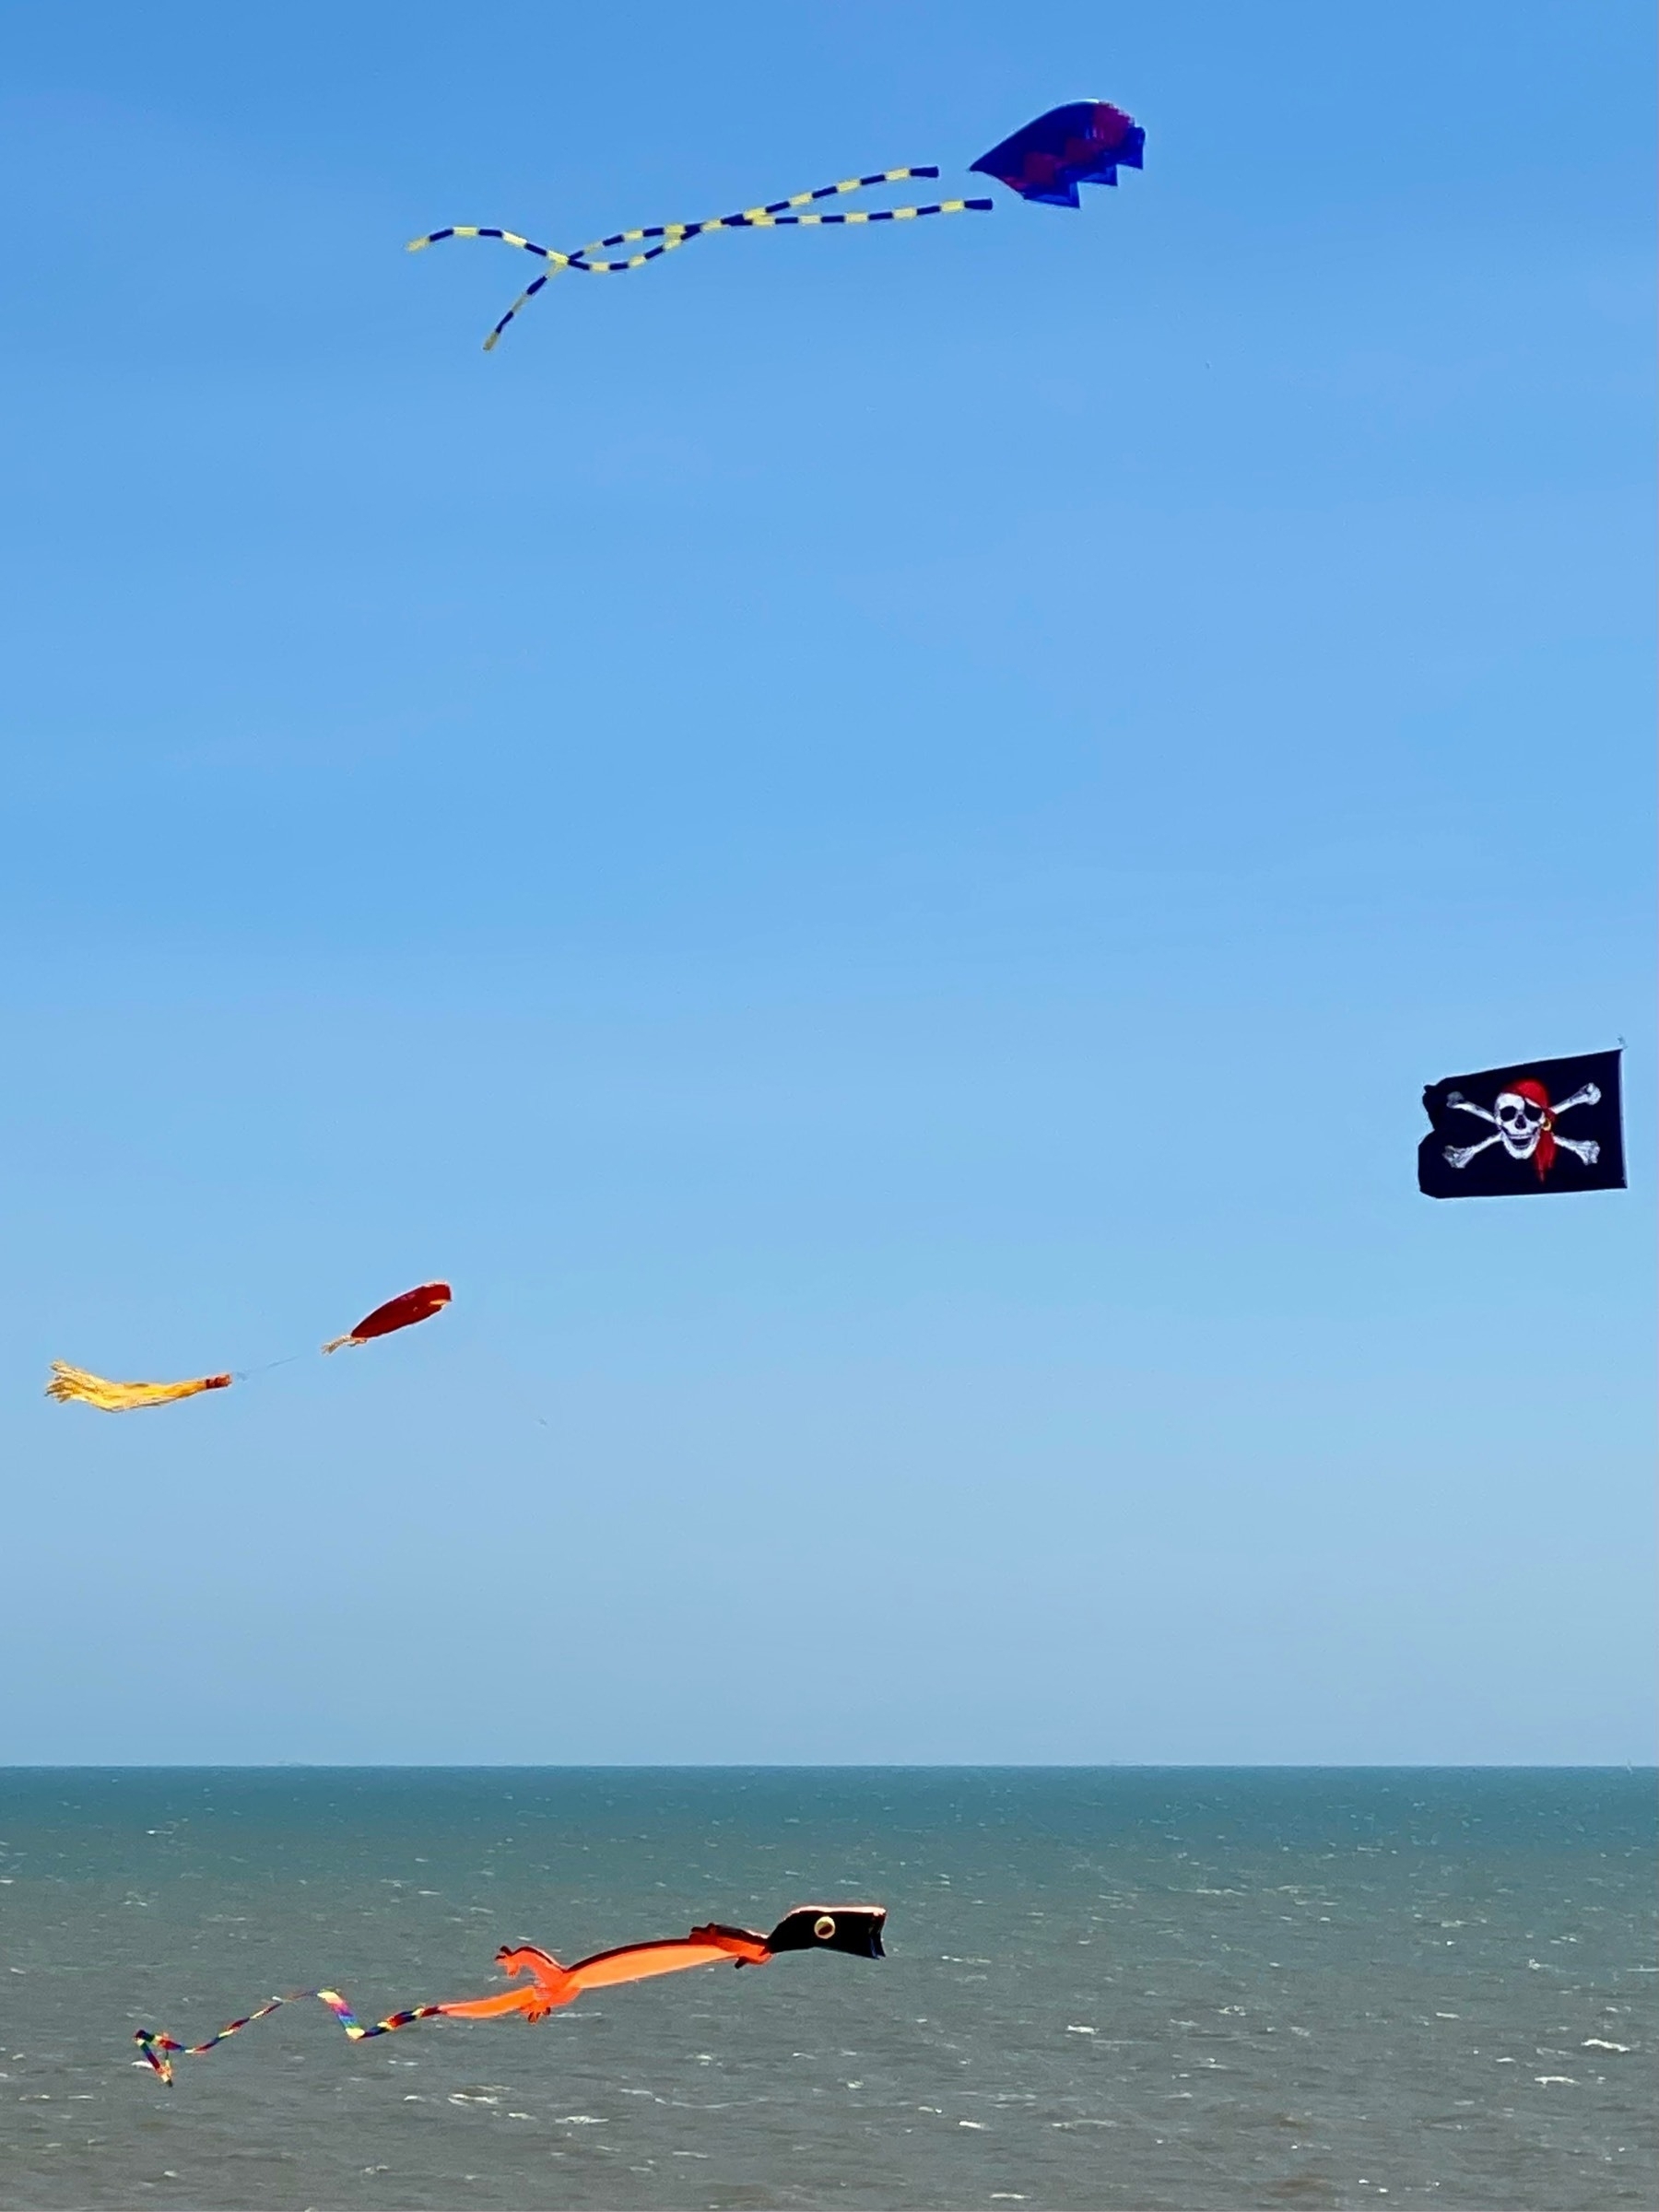 Four kites flying in a blue sky over a blue-green sea